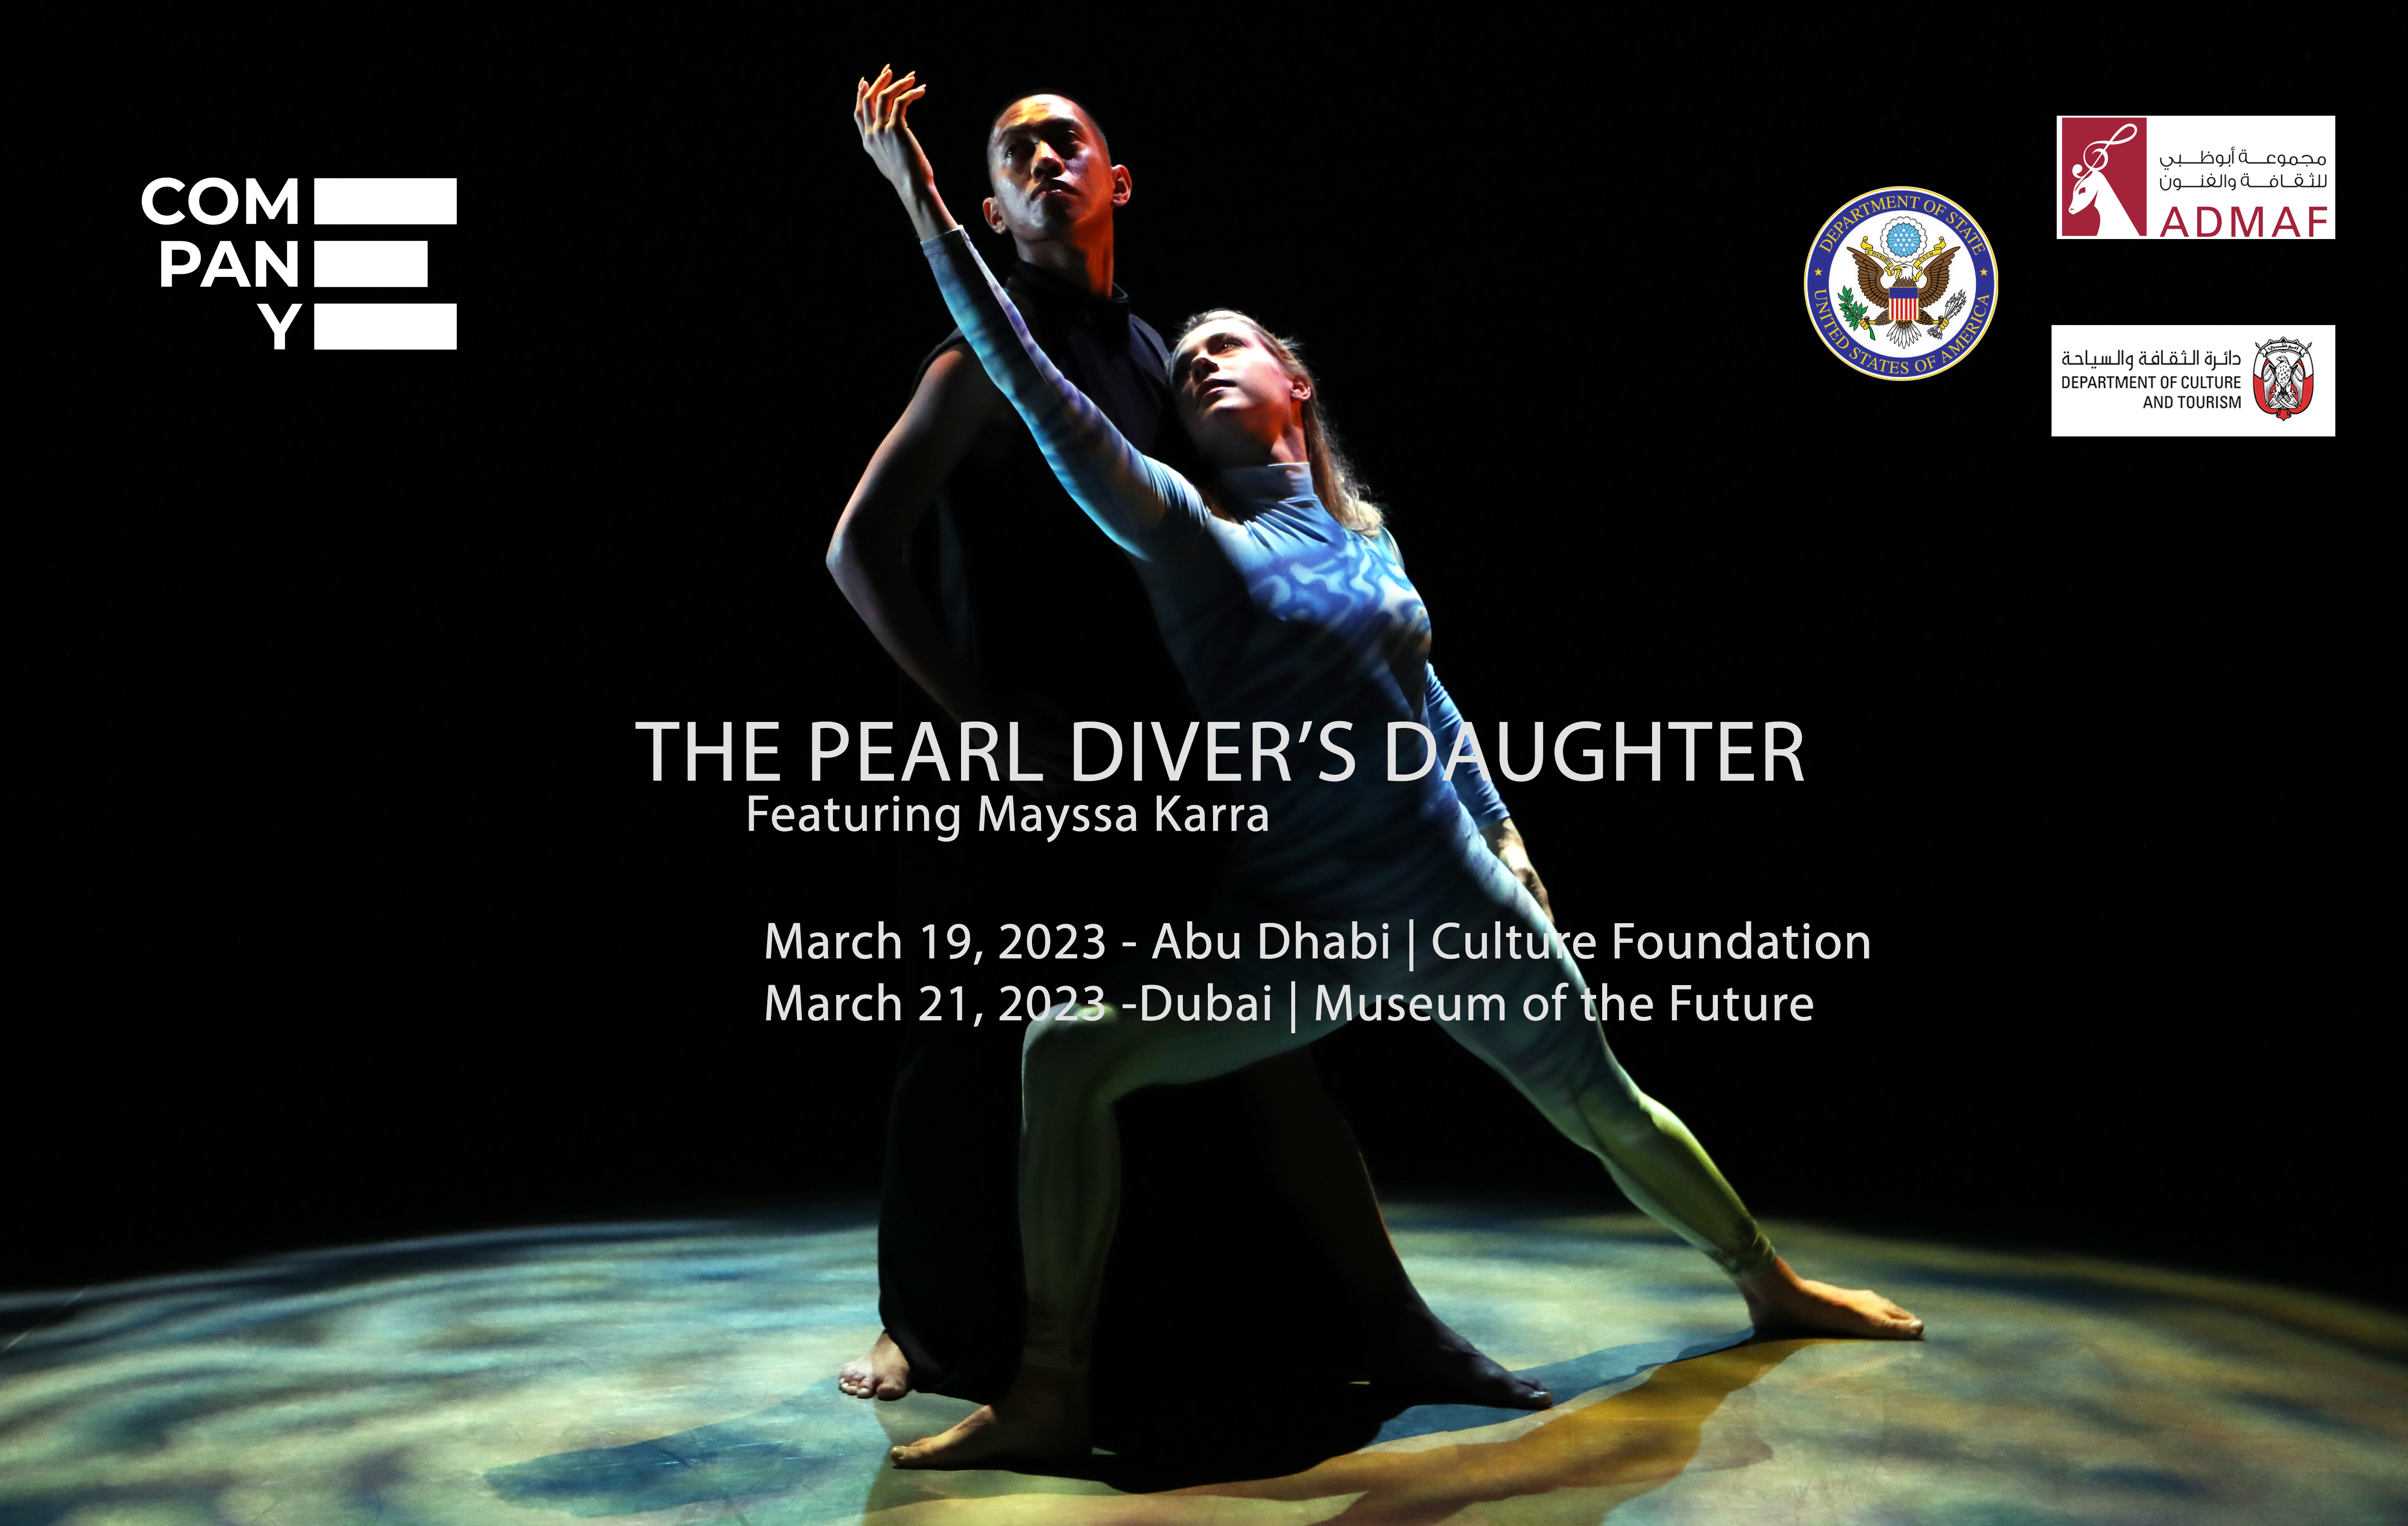 The Pearl Diver's Daughter